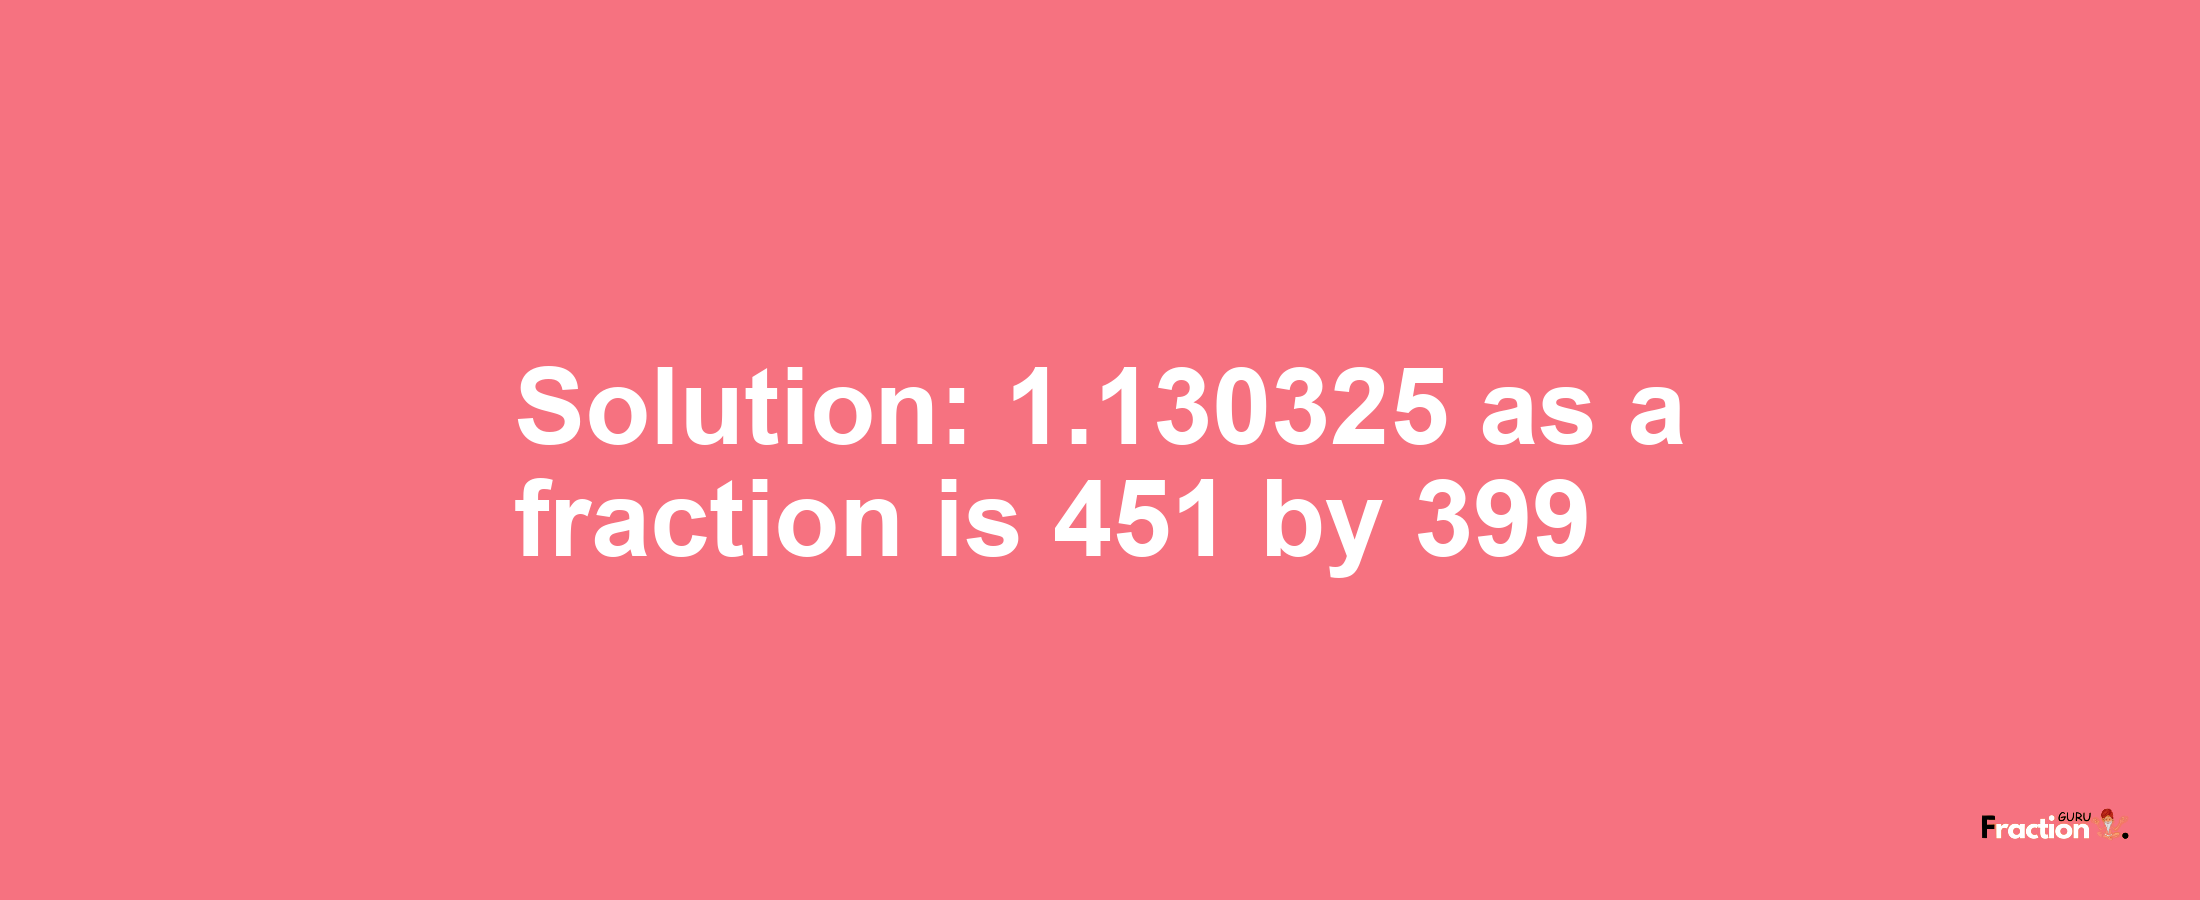 Solution:1.130325 as a fraction is 451/399